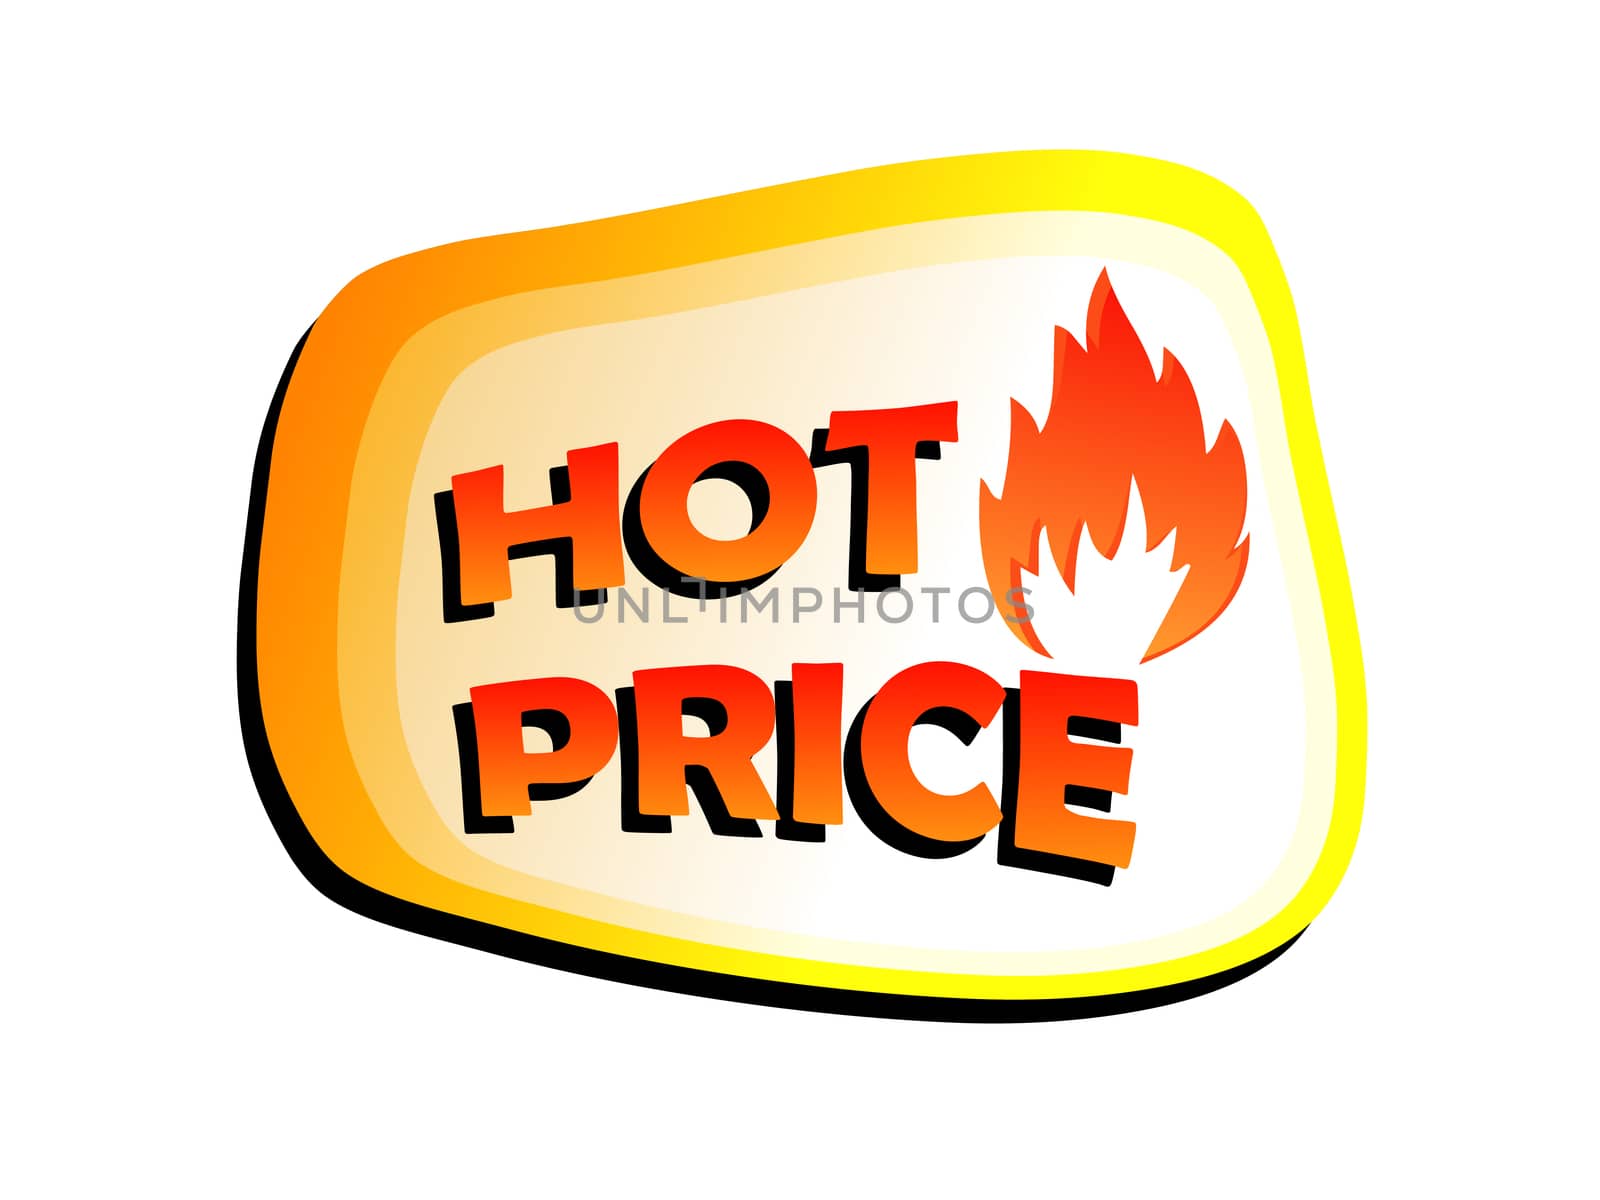 hot price text banner with flame sign, flat design label with fire symbol, business shopping concept